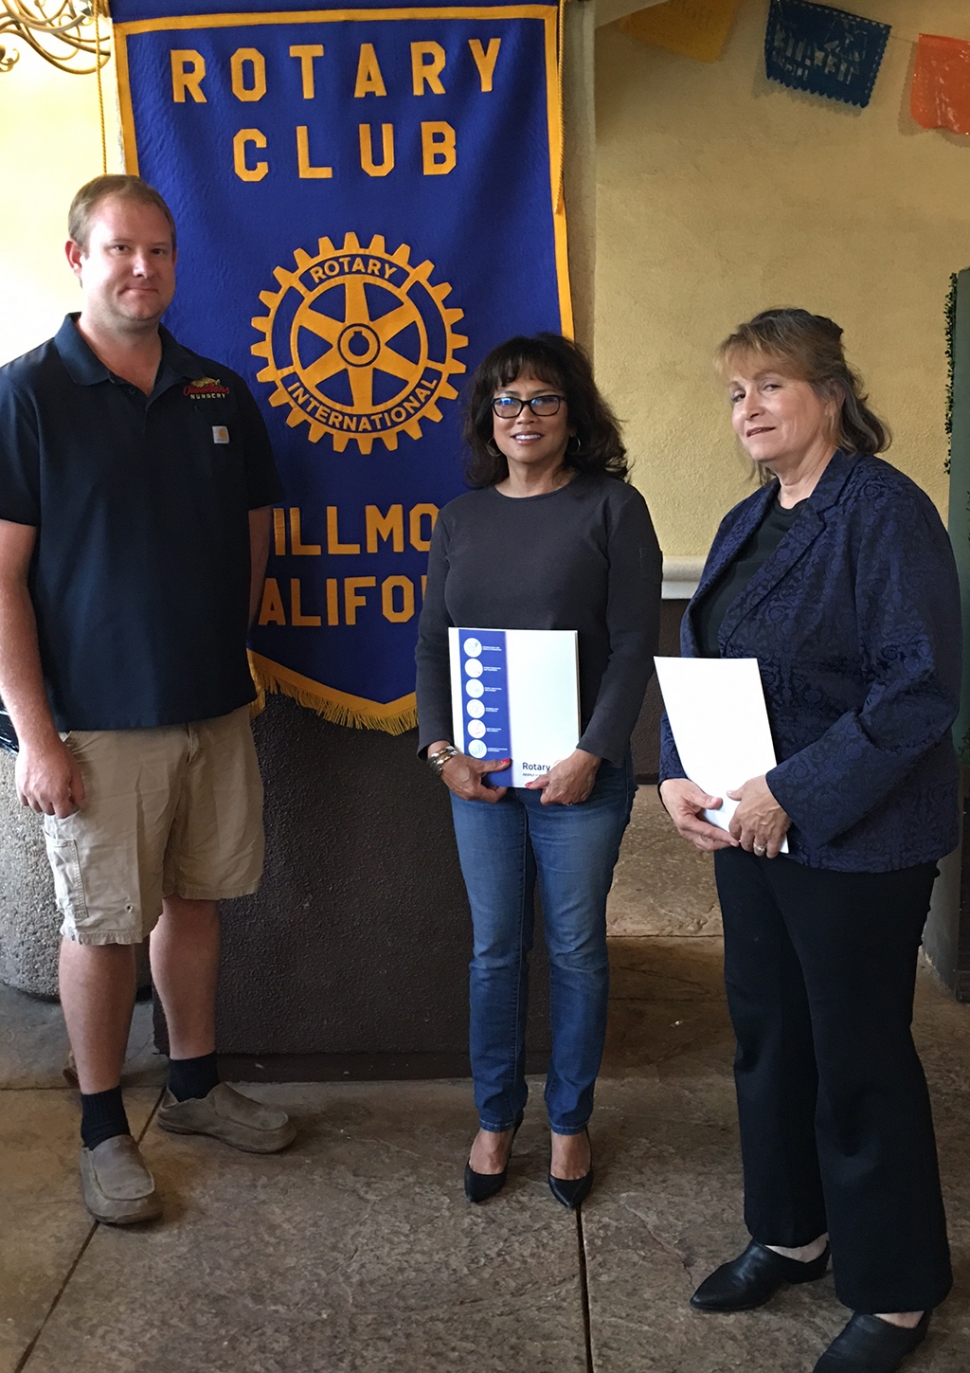 Pictured is Rotary President Andy Klittich inducting two new members into the Rotary Club of Fillmore: Carina
Forsythe and Anna Reilley. Photo credit Rotarian Martha Richardson.